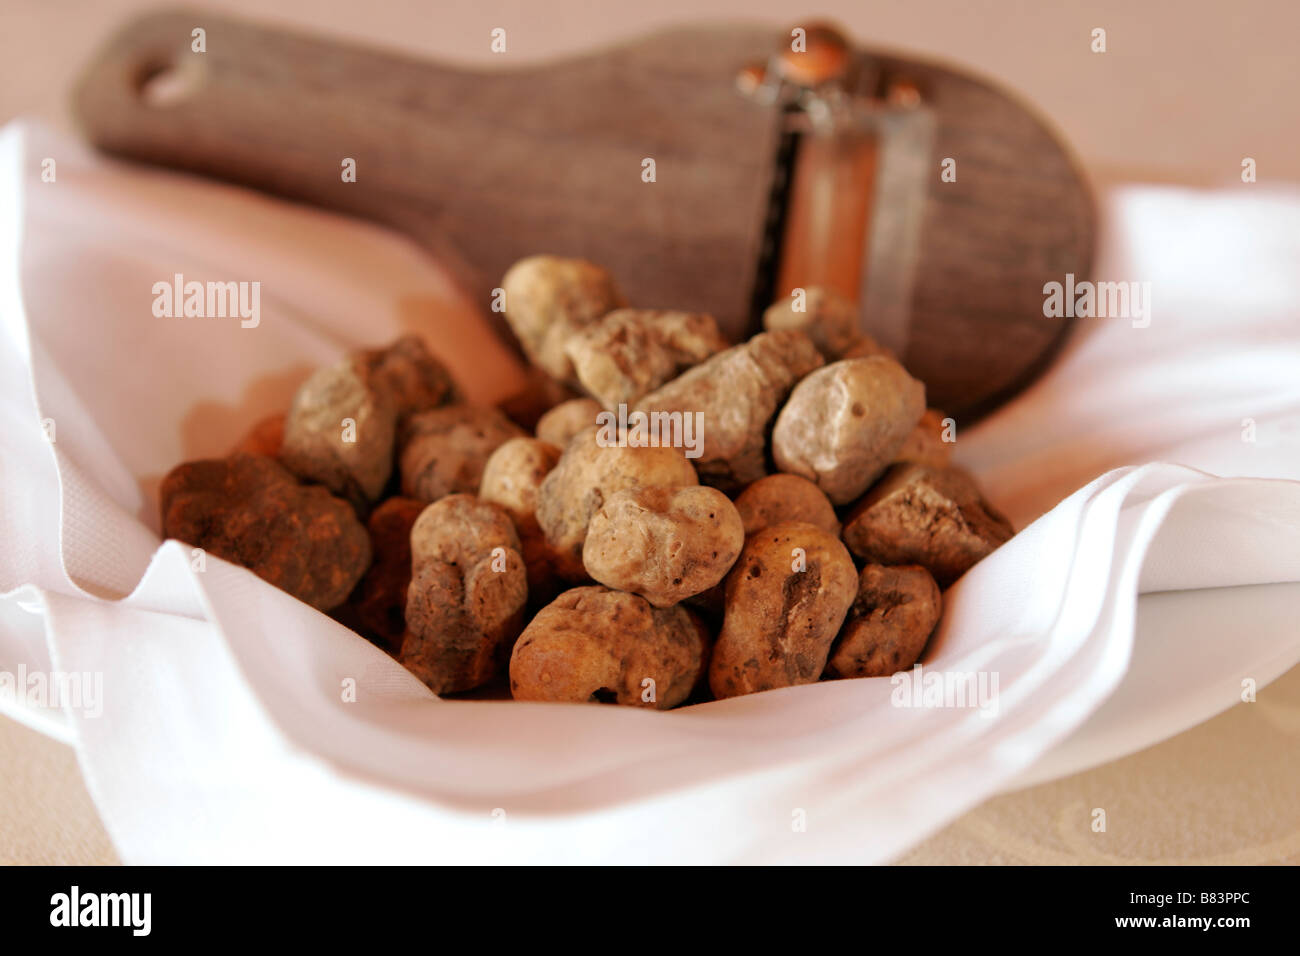 A bowl of white truffles or Alba Truffle (Tuber magnatum) on display in a restaurant in Slovenia Stock Photo